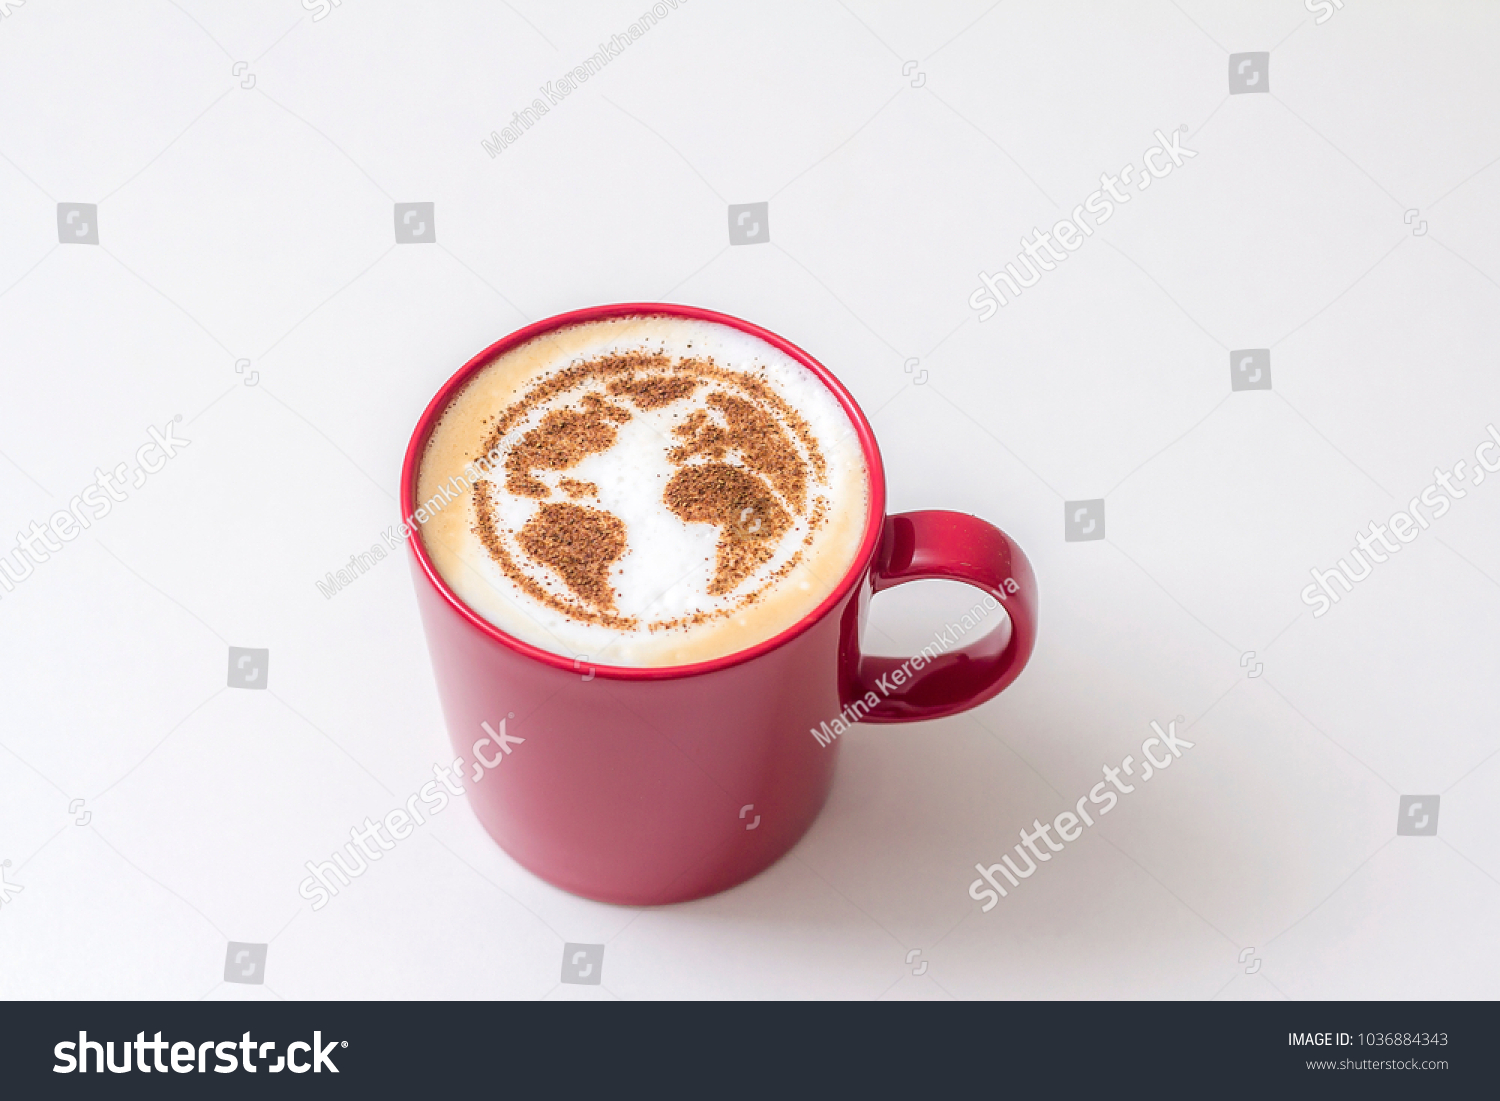 day of the earth red cappuccino cup with a drawing of the planet earth on milk foam #1036884343